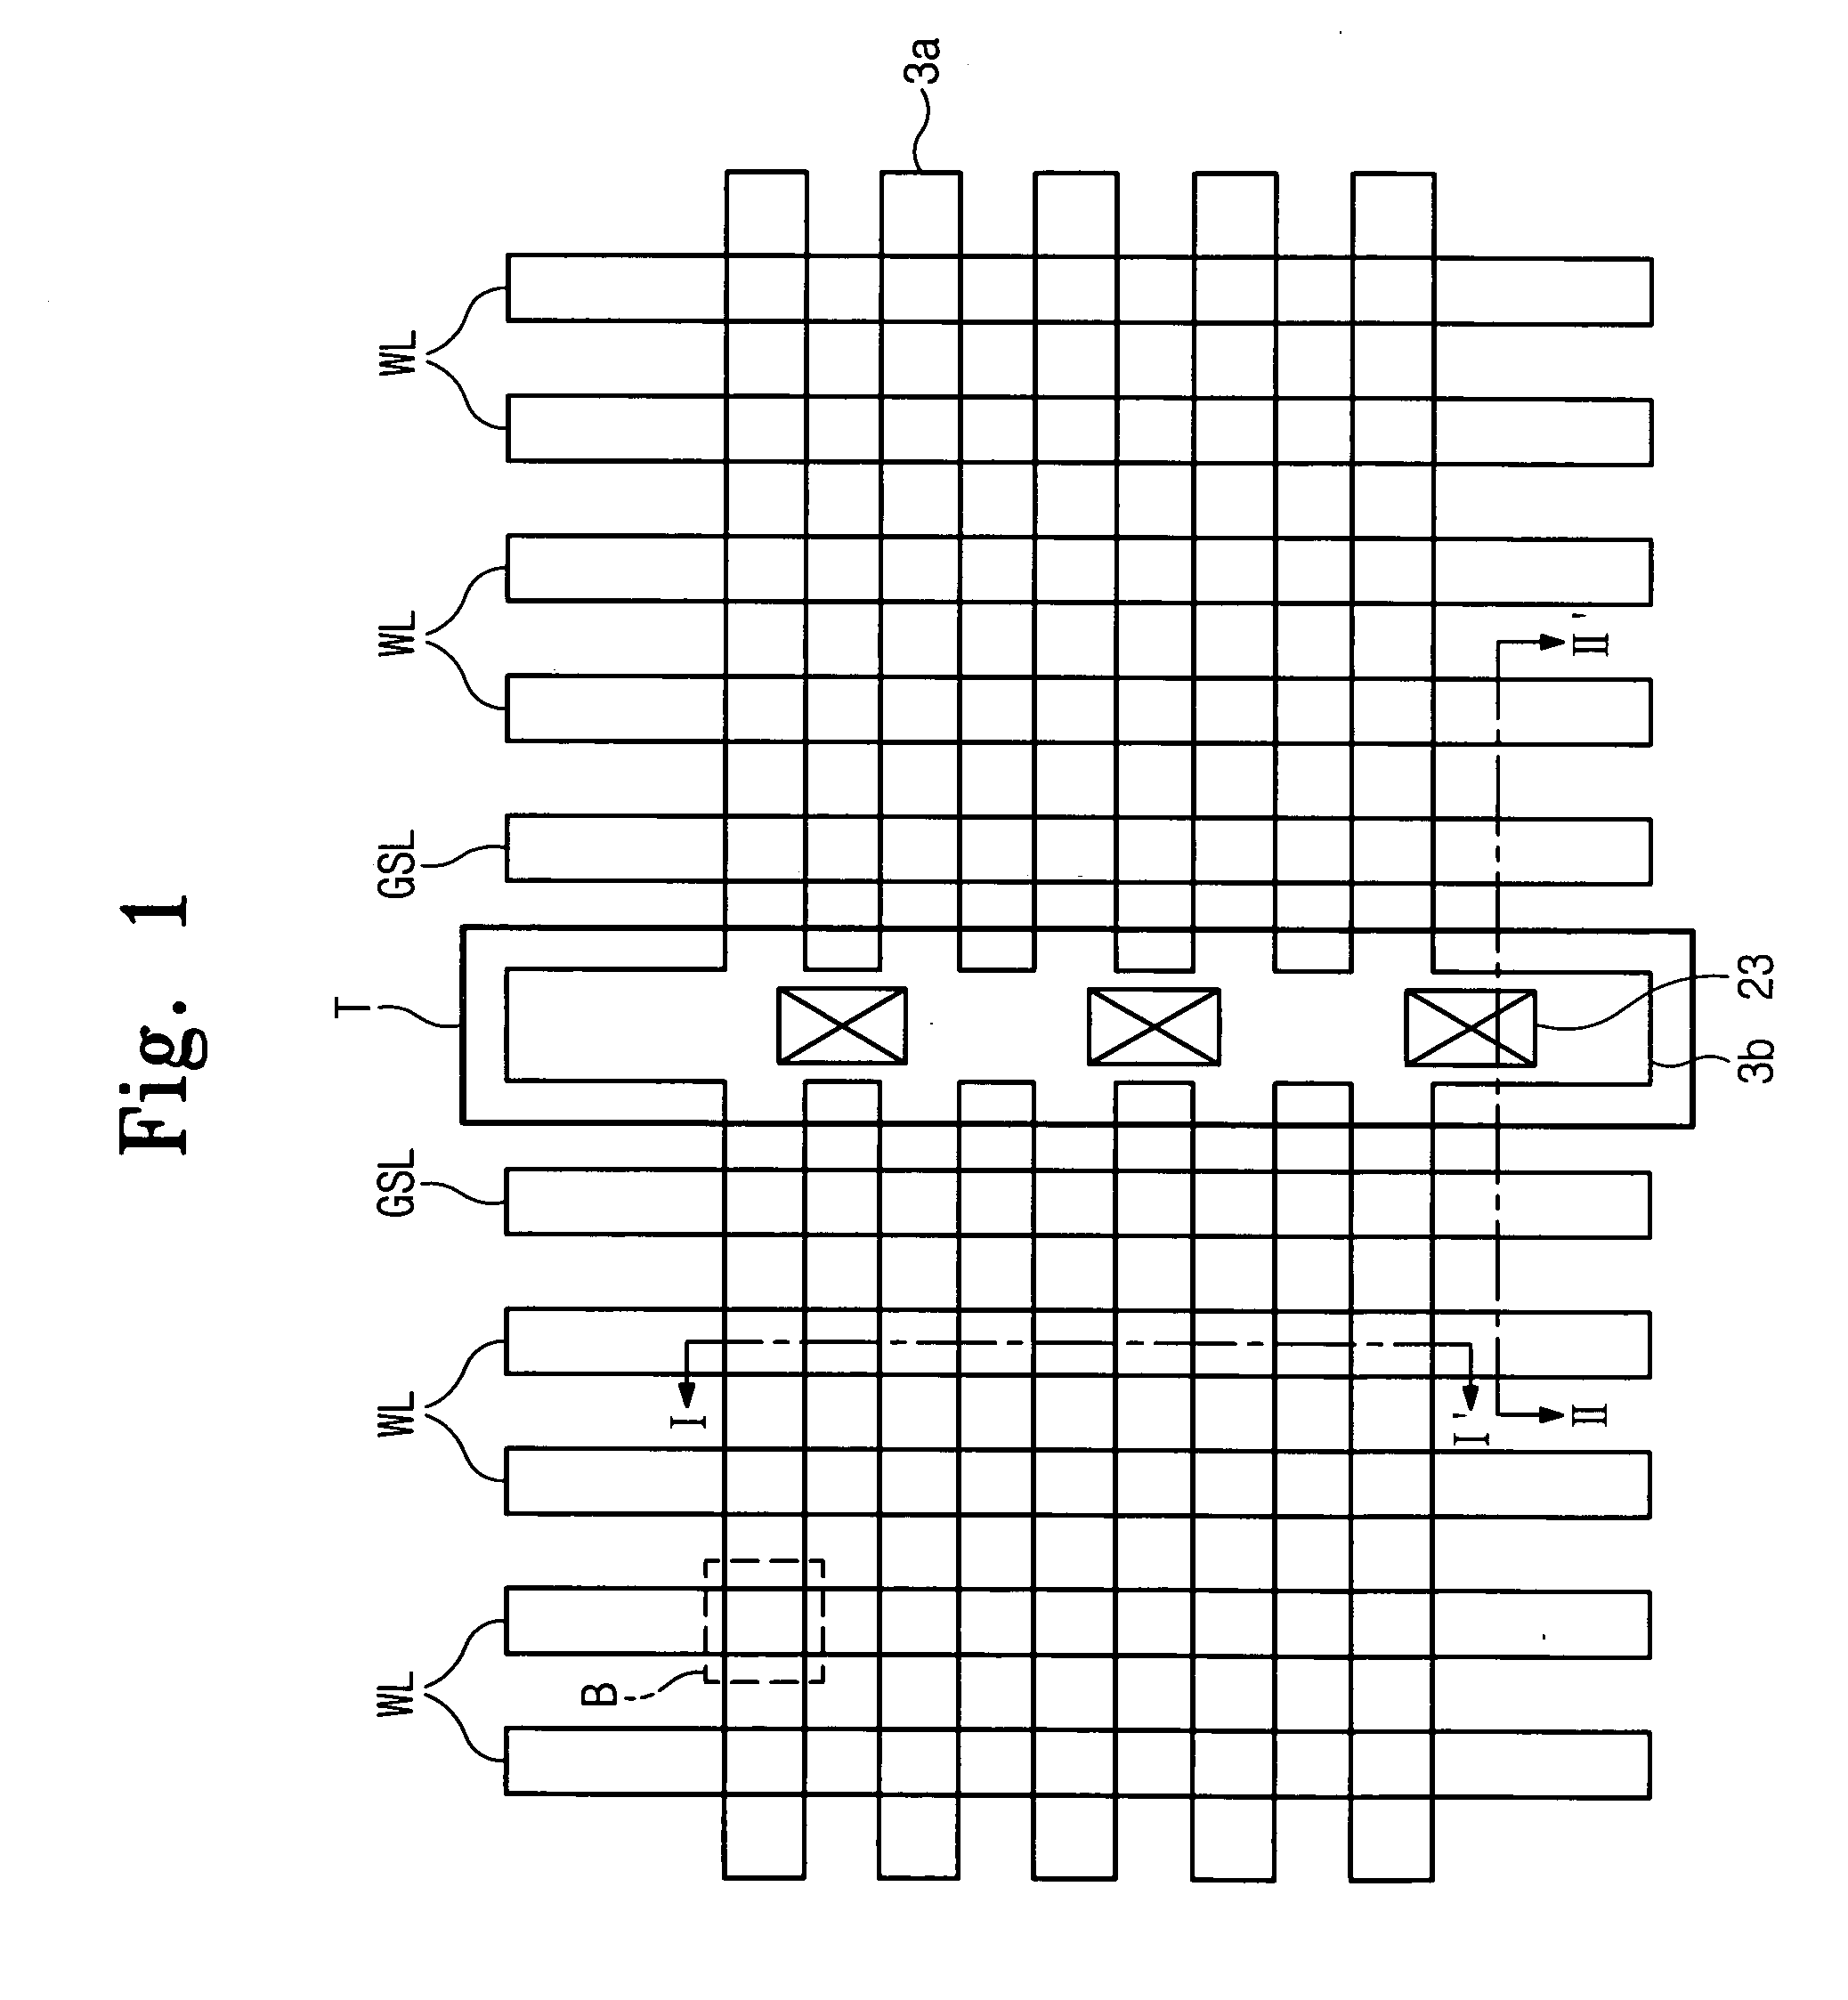 Finfets, nonvolatile memory devices including finfets, and methods of forming the same